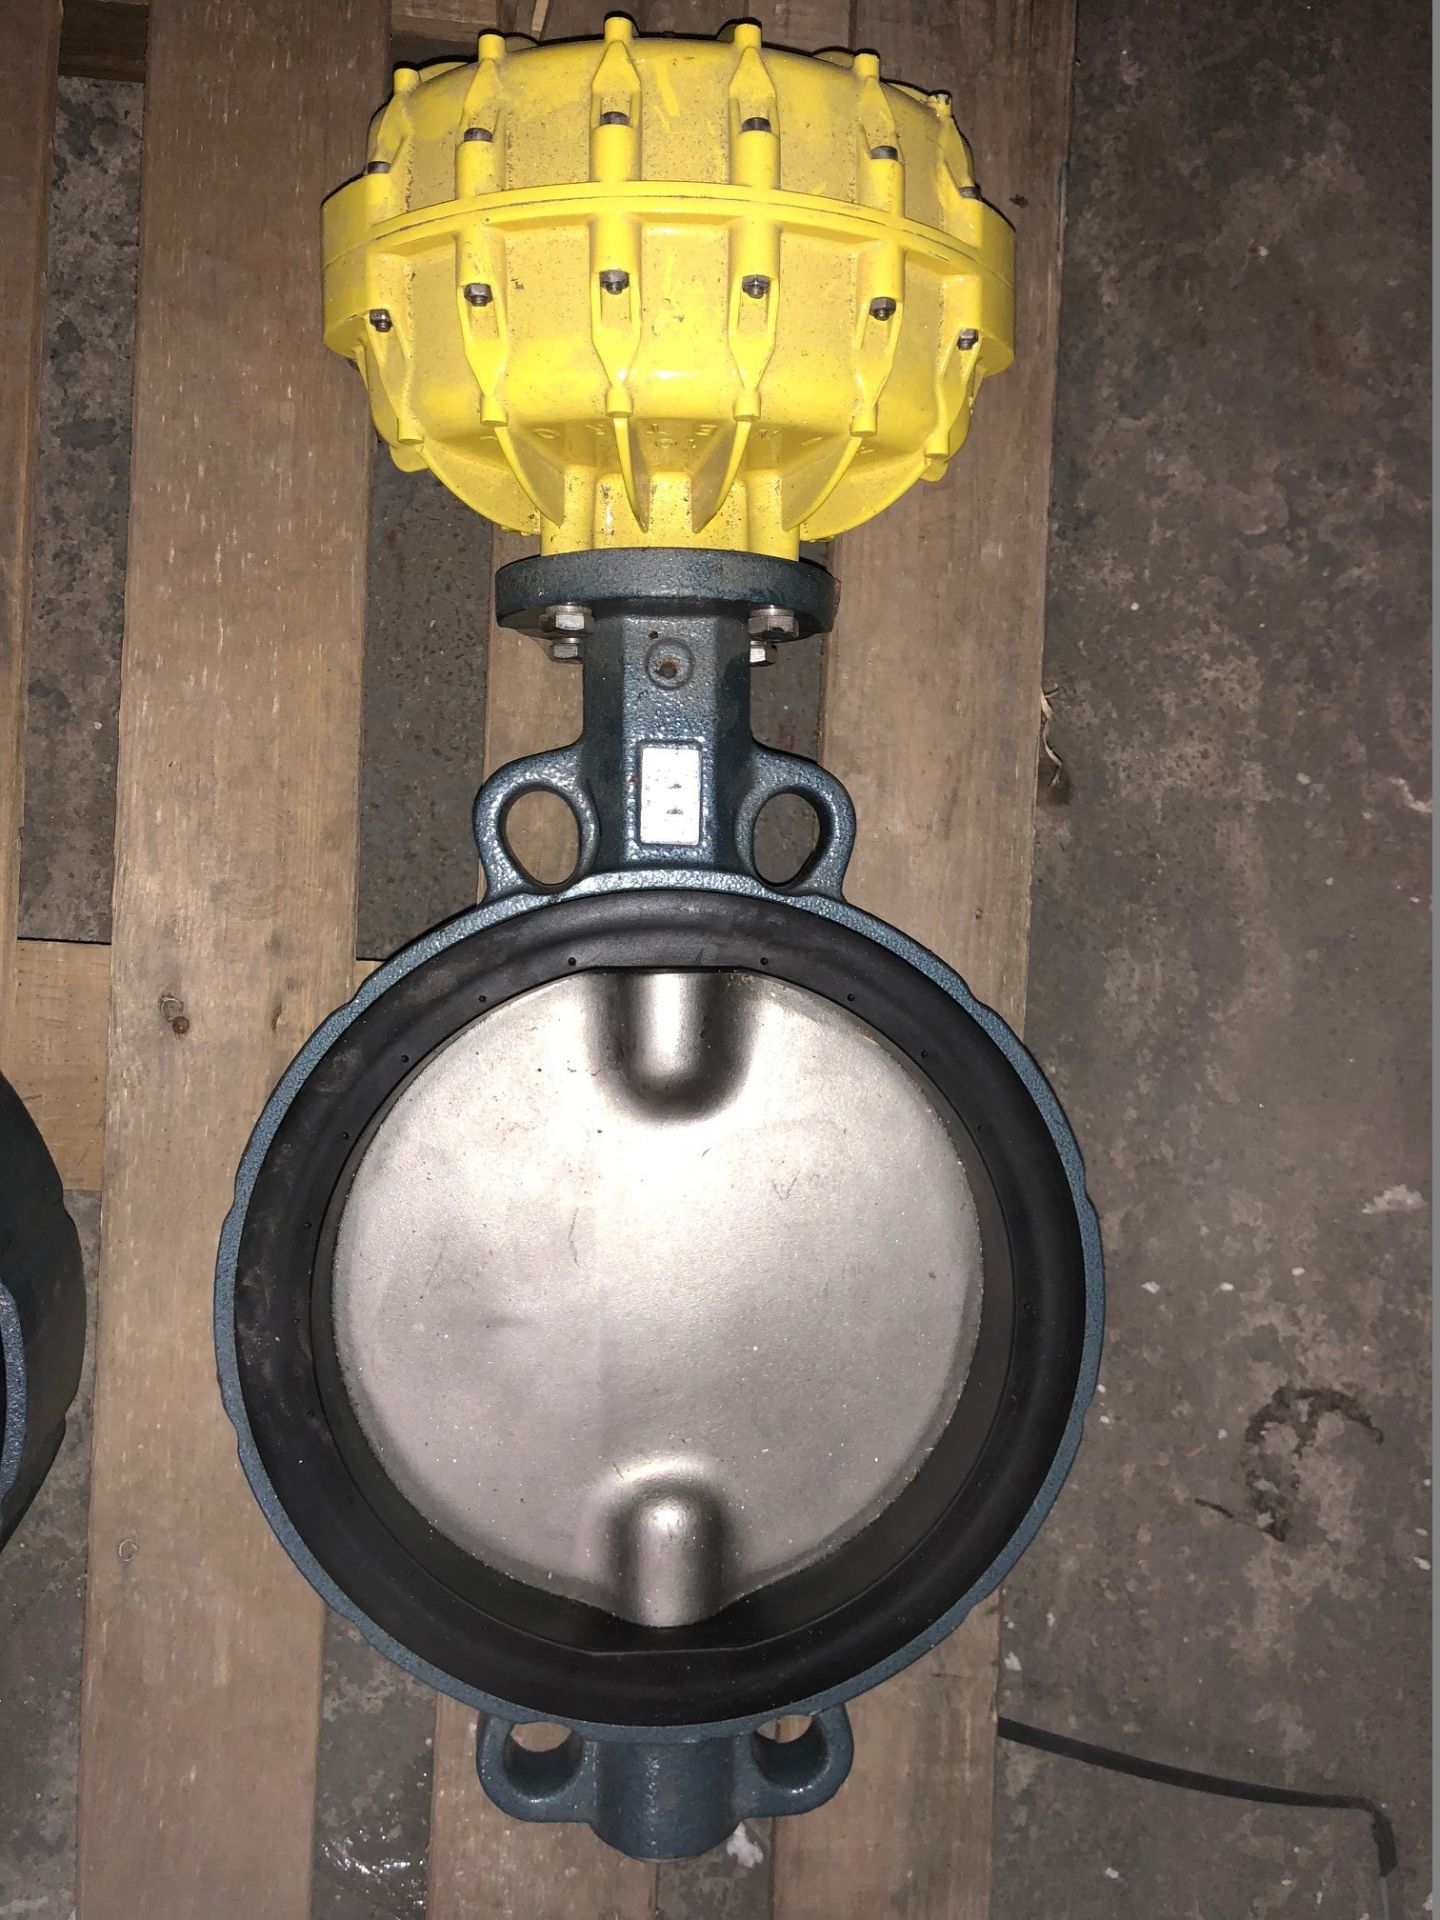 10" Cast Iron Butterfly Valve With a Kinetrol Model 10 Actuator Attached